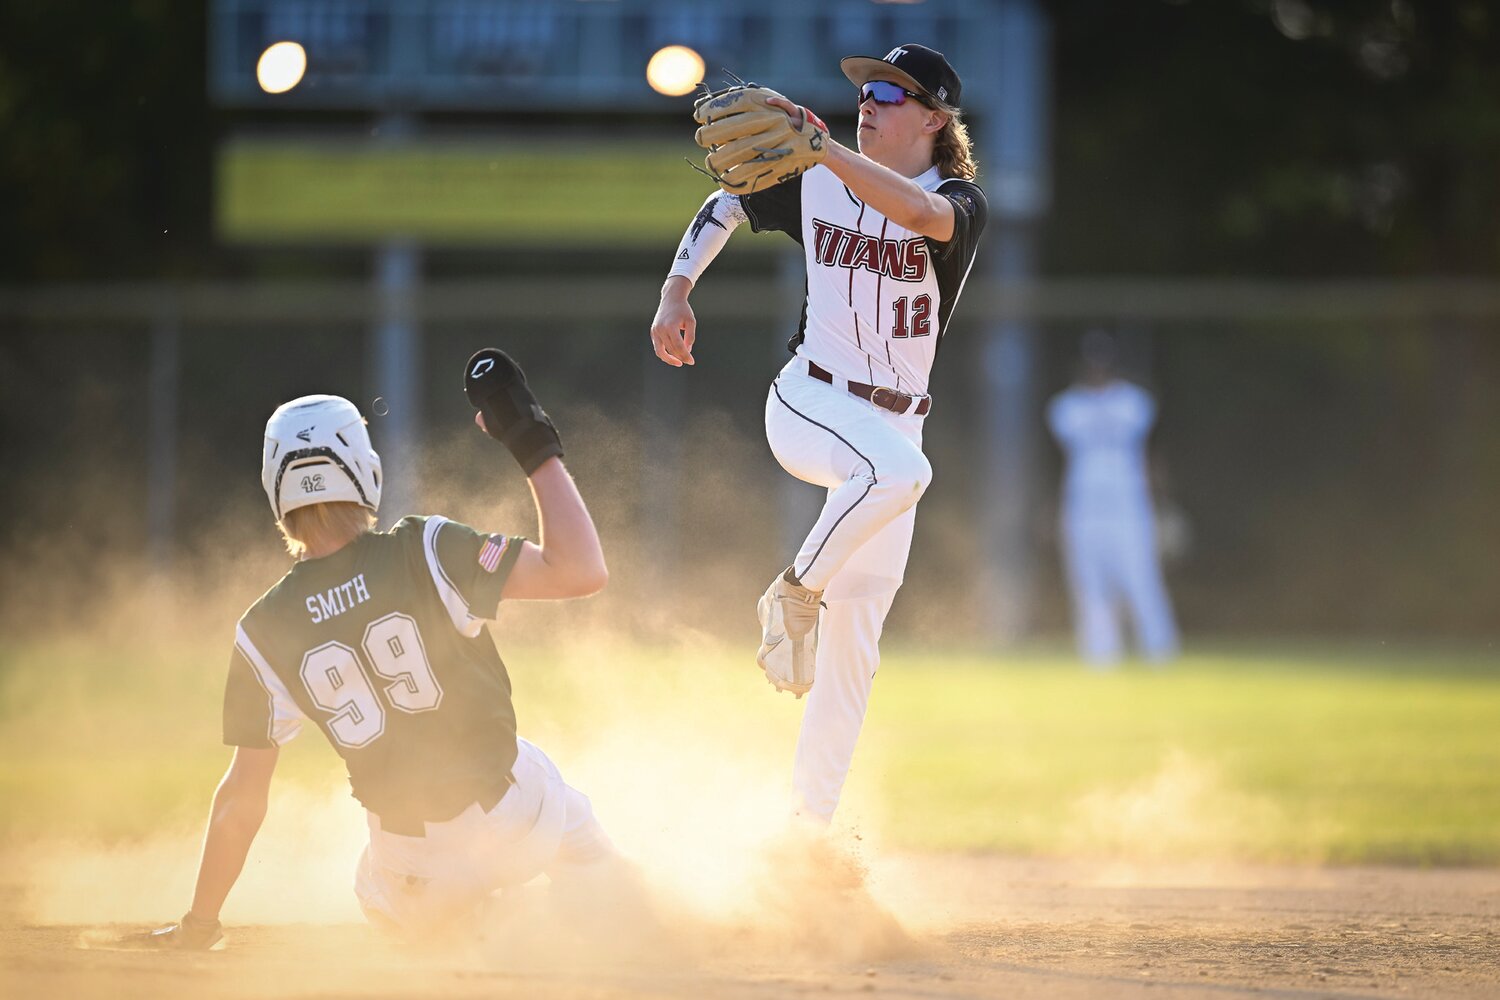 Pennridge’s Connor Smith slides into second base as Hatfield-Towamencin’s Brian Diffley fields the throw in the second inning.